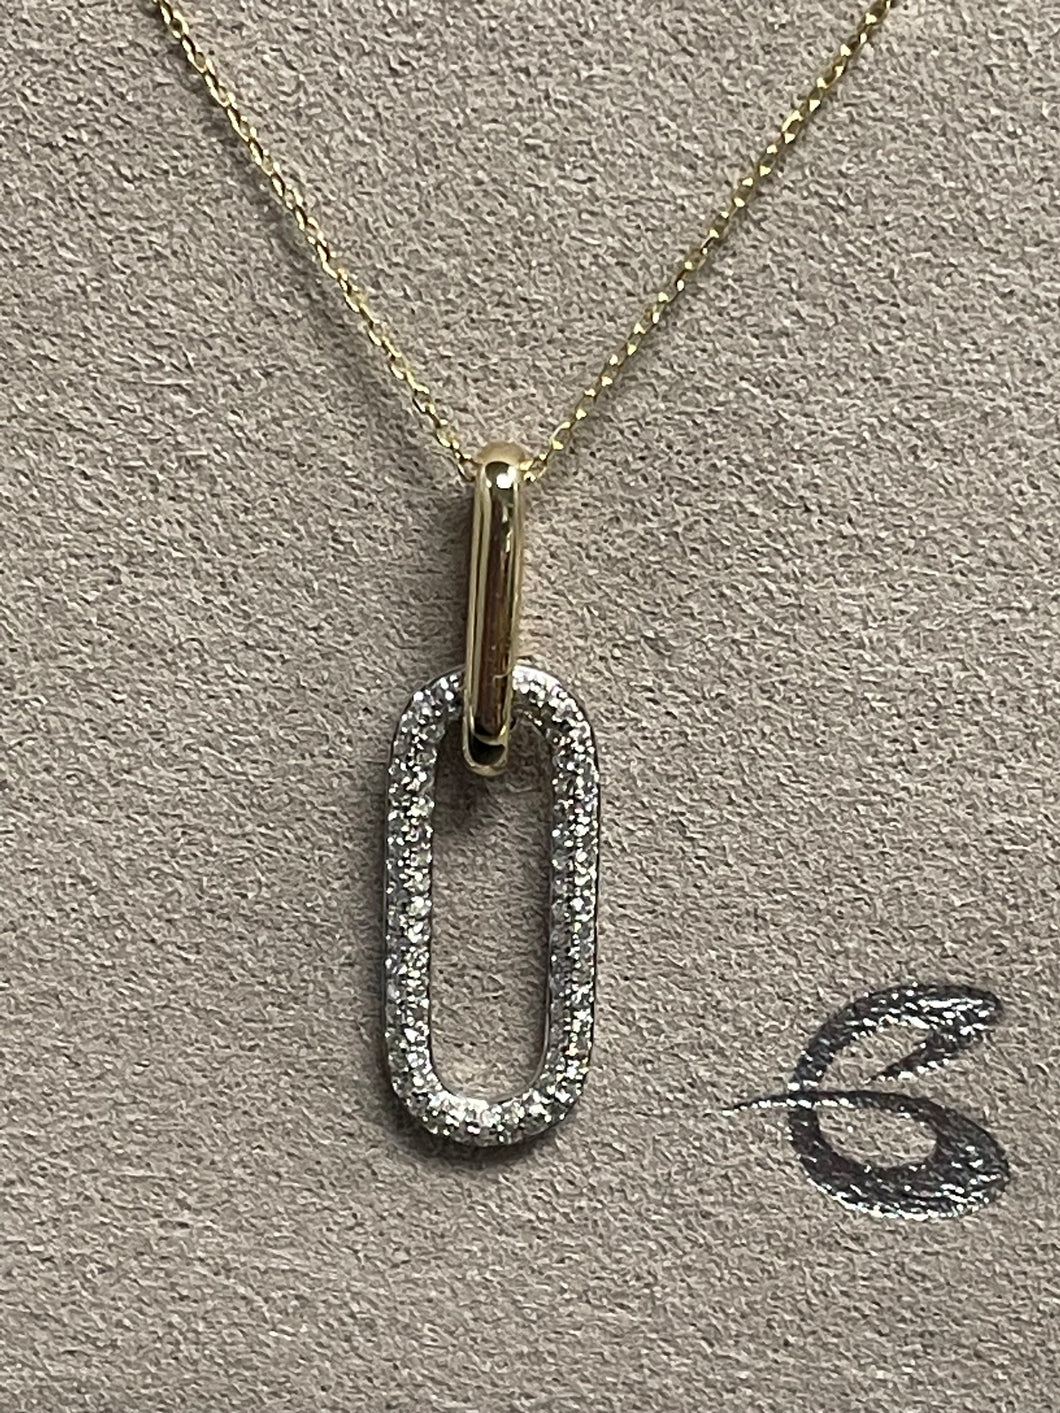 One Ladies 14k Yellow Gold and White Gold Paperclip Style Diamond Pendant on a 16-18